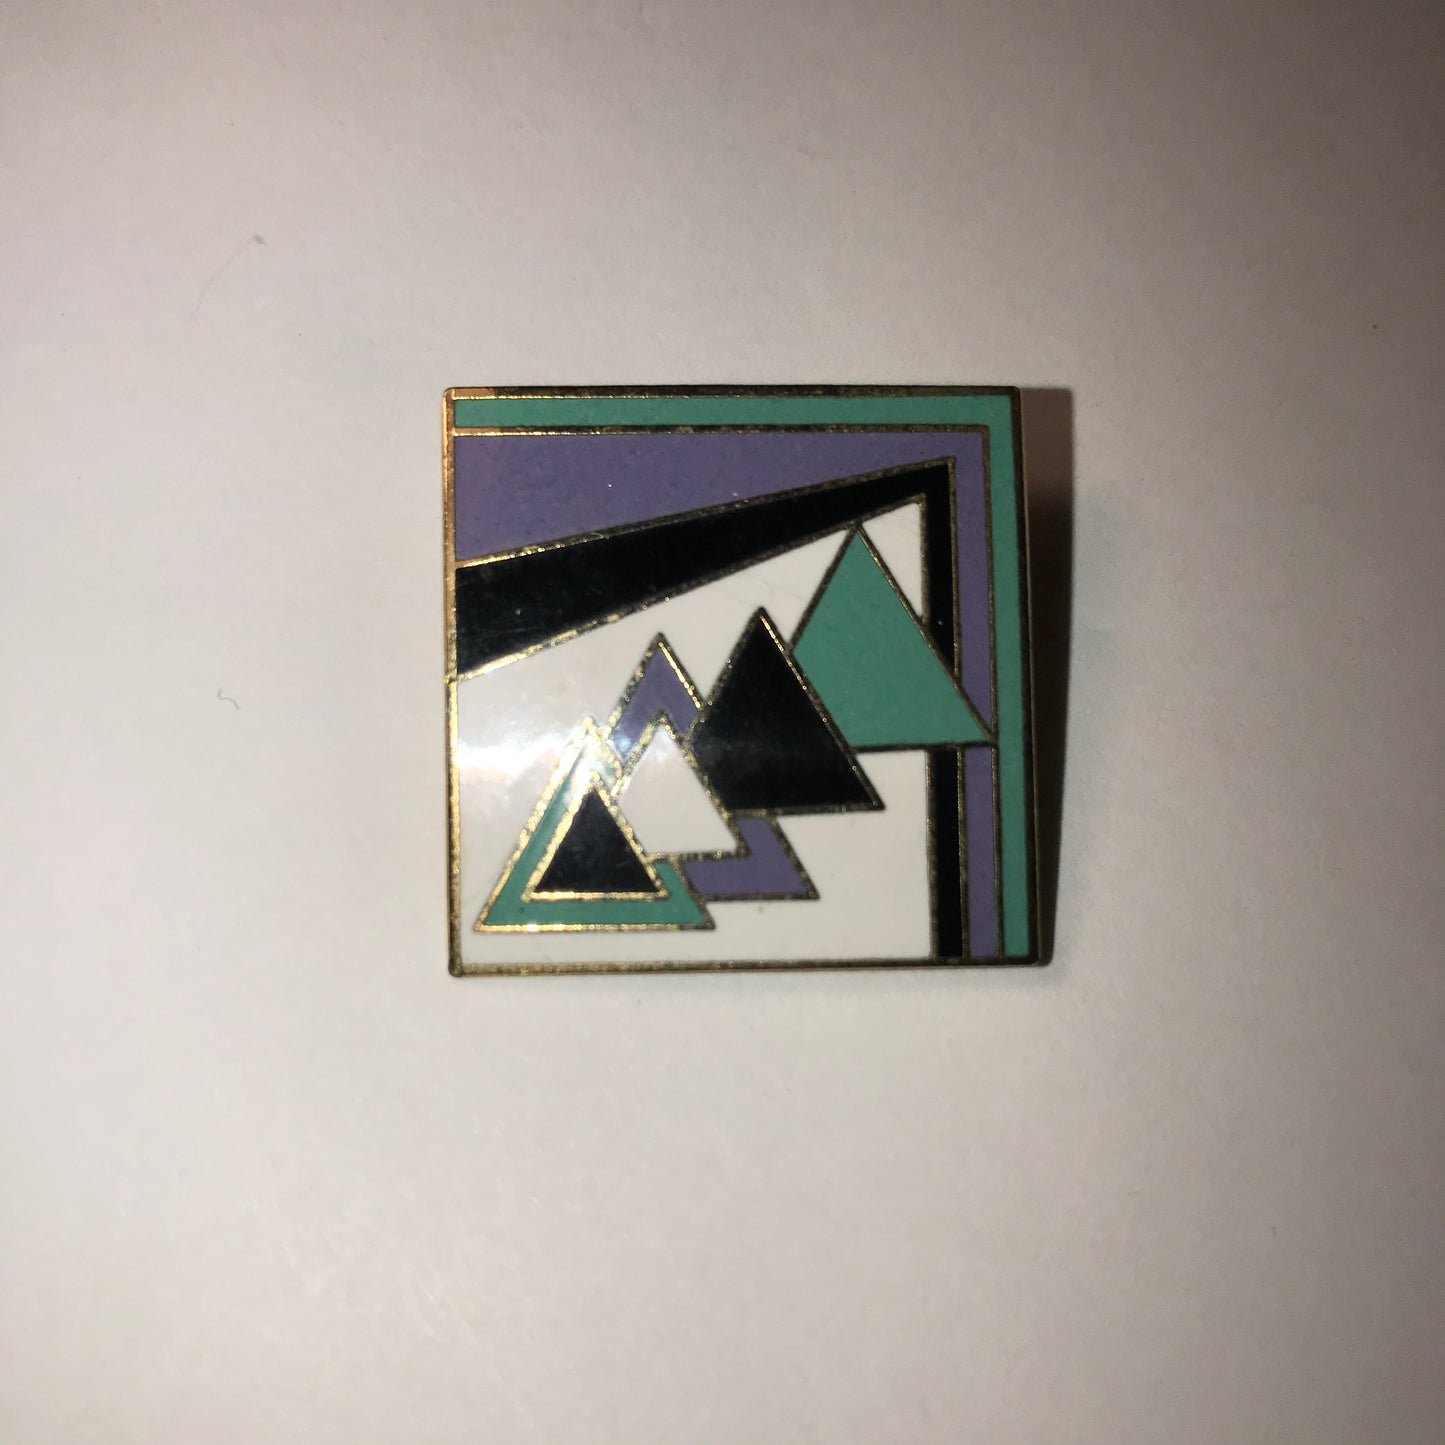 80's Style Graphic Square Pin